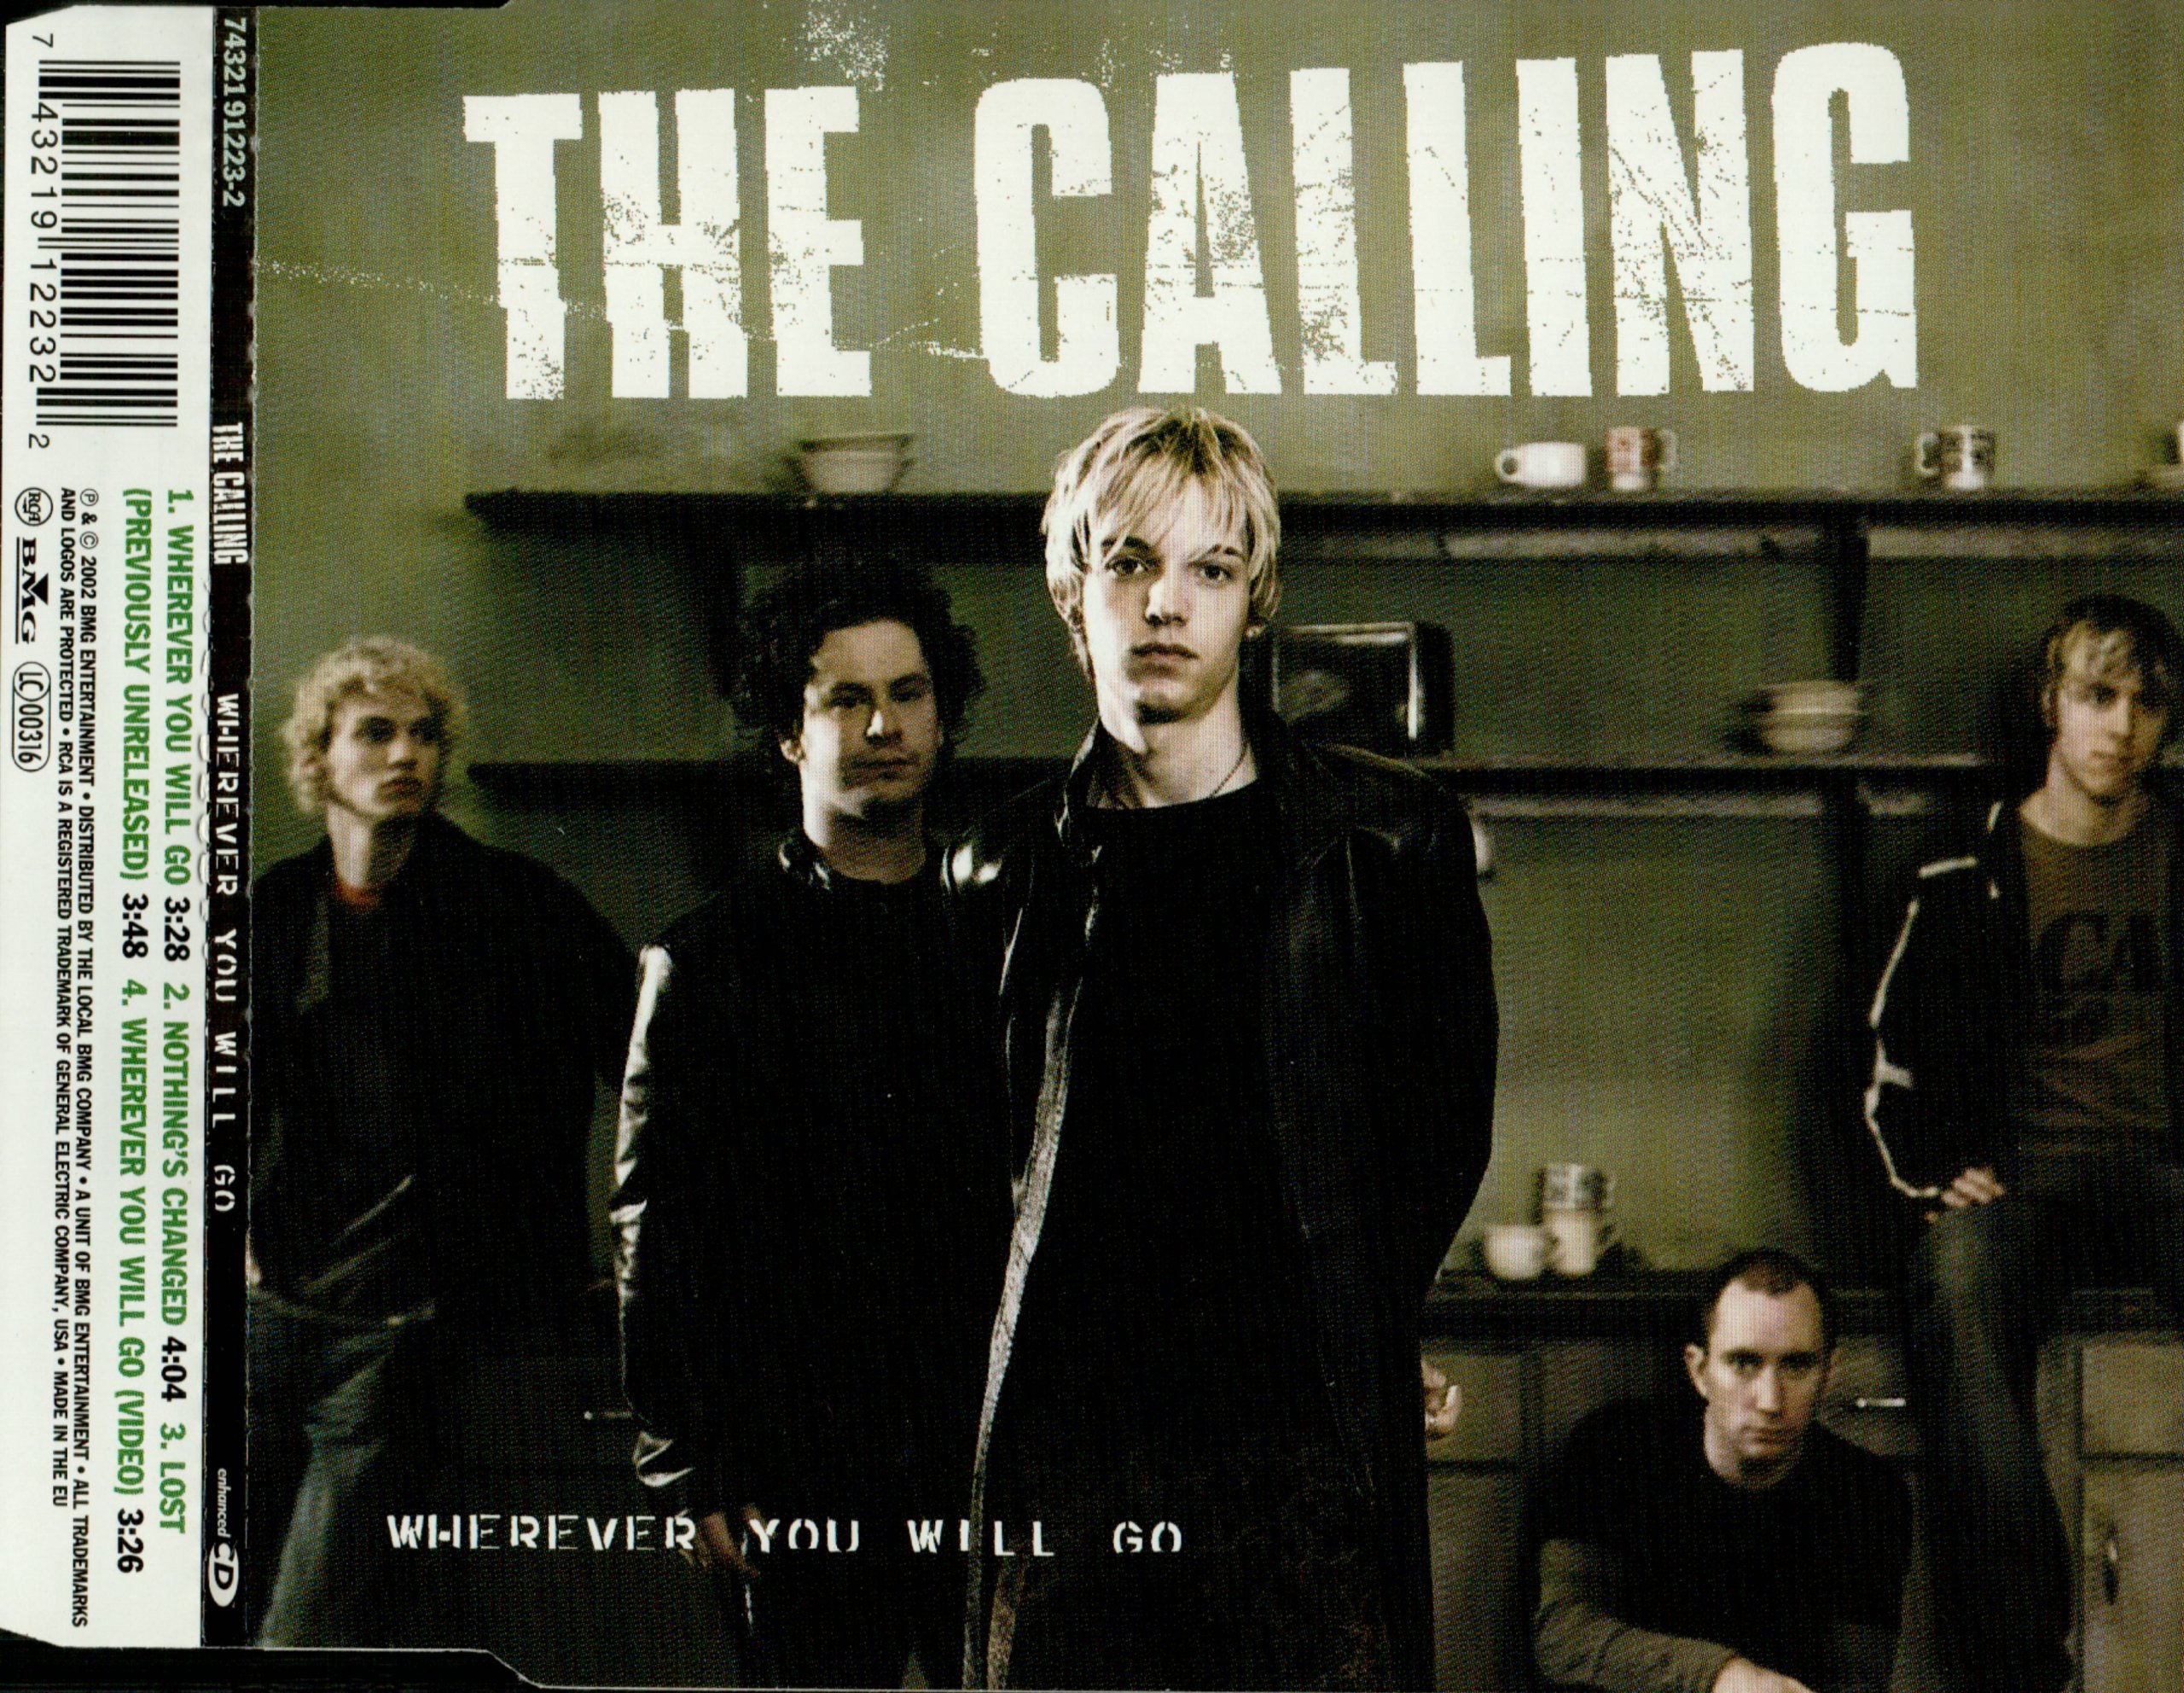 The calling series. The calling группа. The calling группа сейчас. The calling солист. The calling wherever you will go.